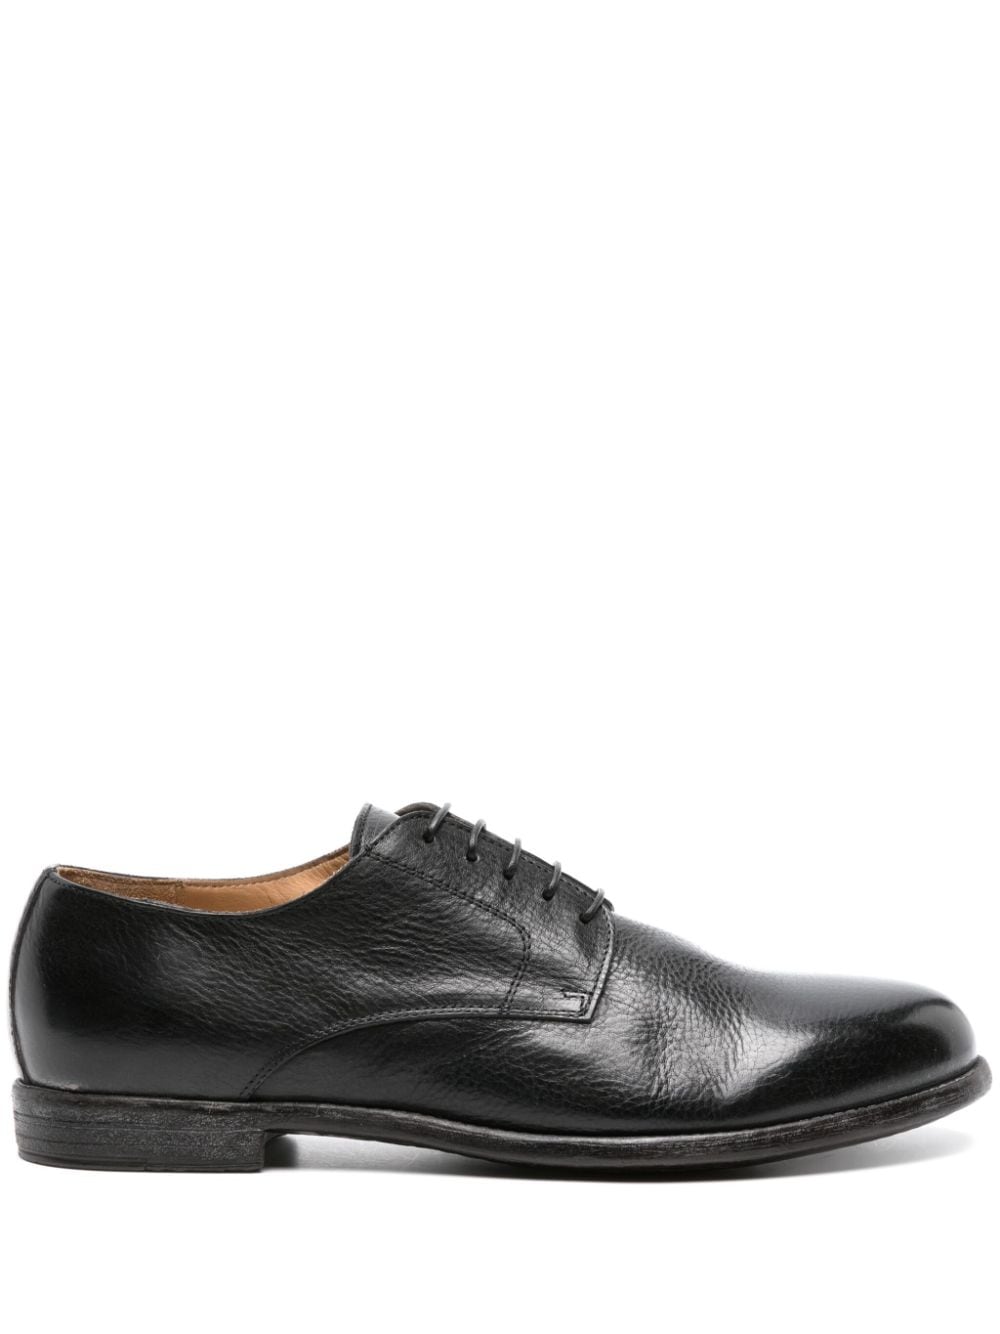 Moma almond-toe leather Derby shoes - Black von Moma